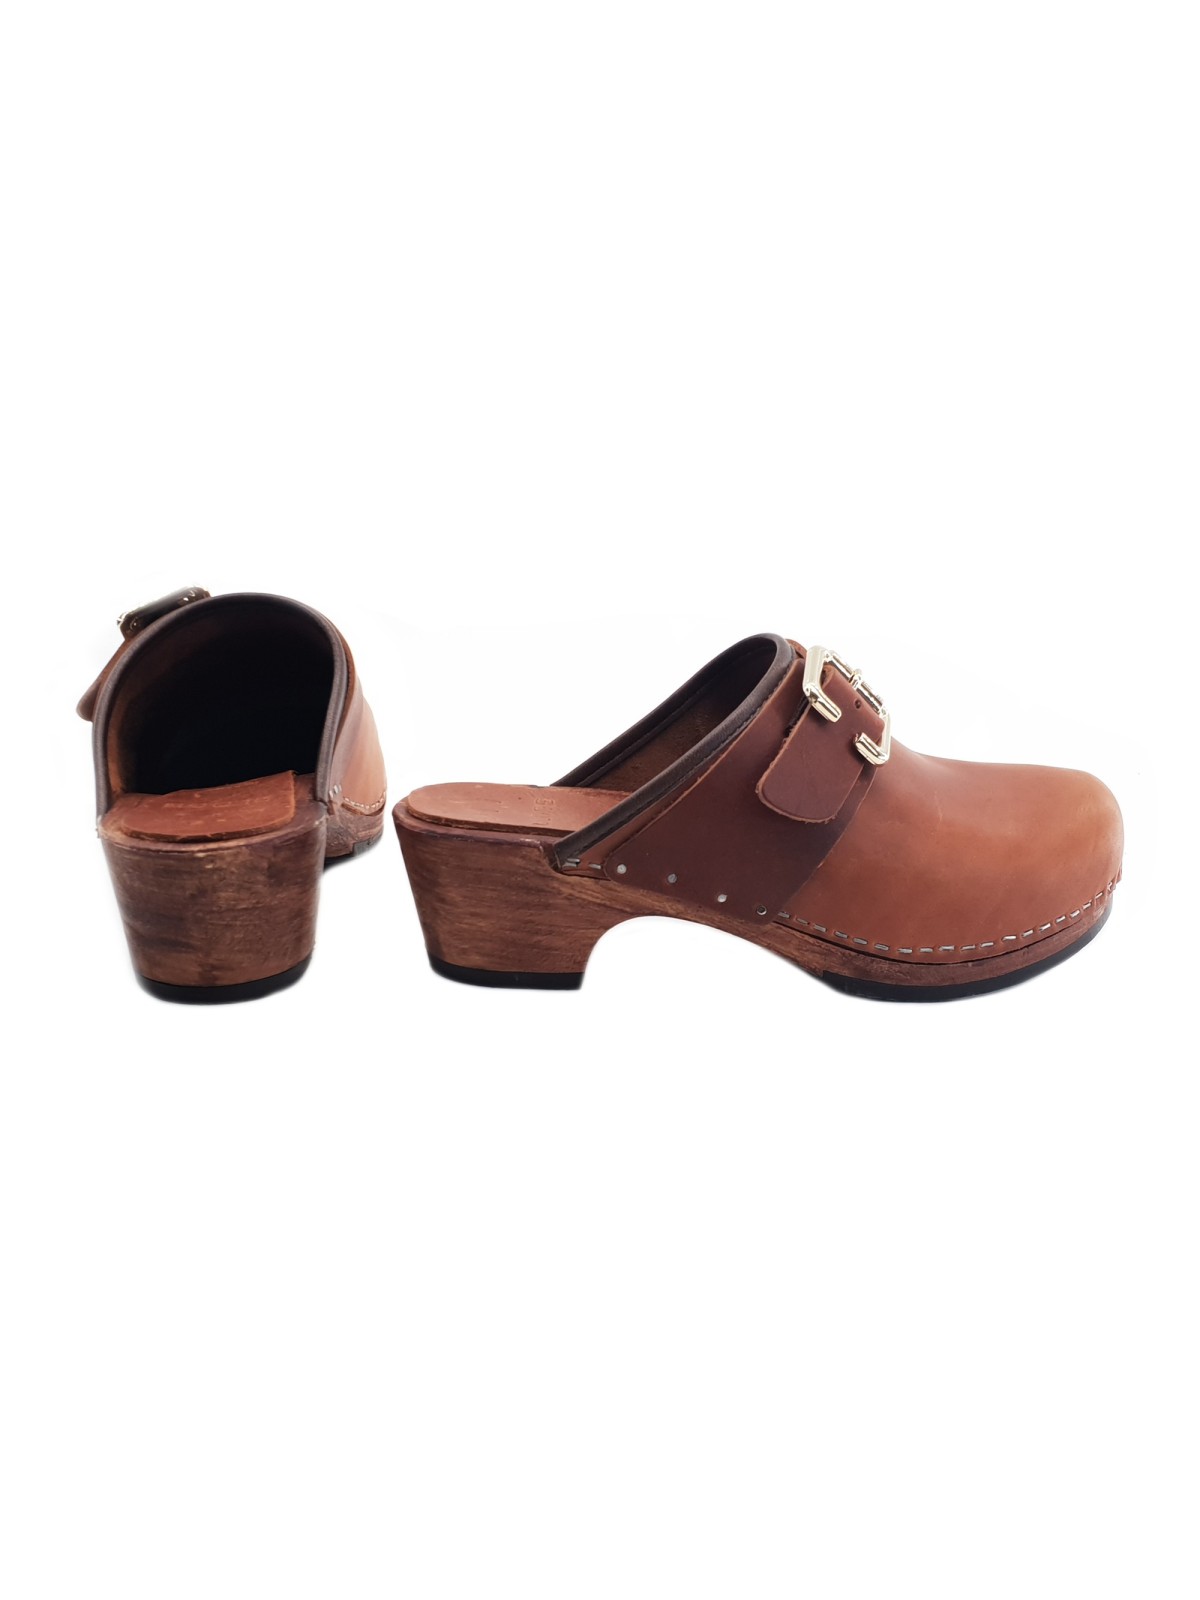 BROWN LEATHER CLOGS WITH BUCKLE